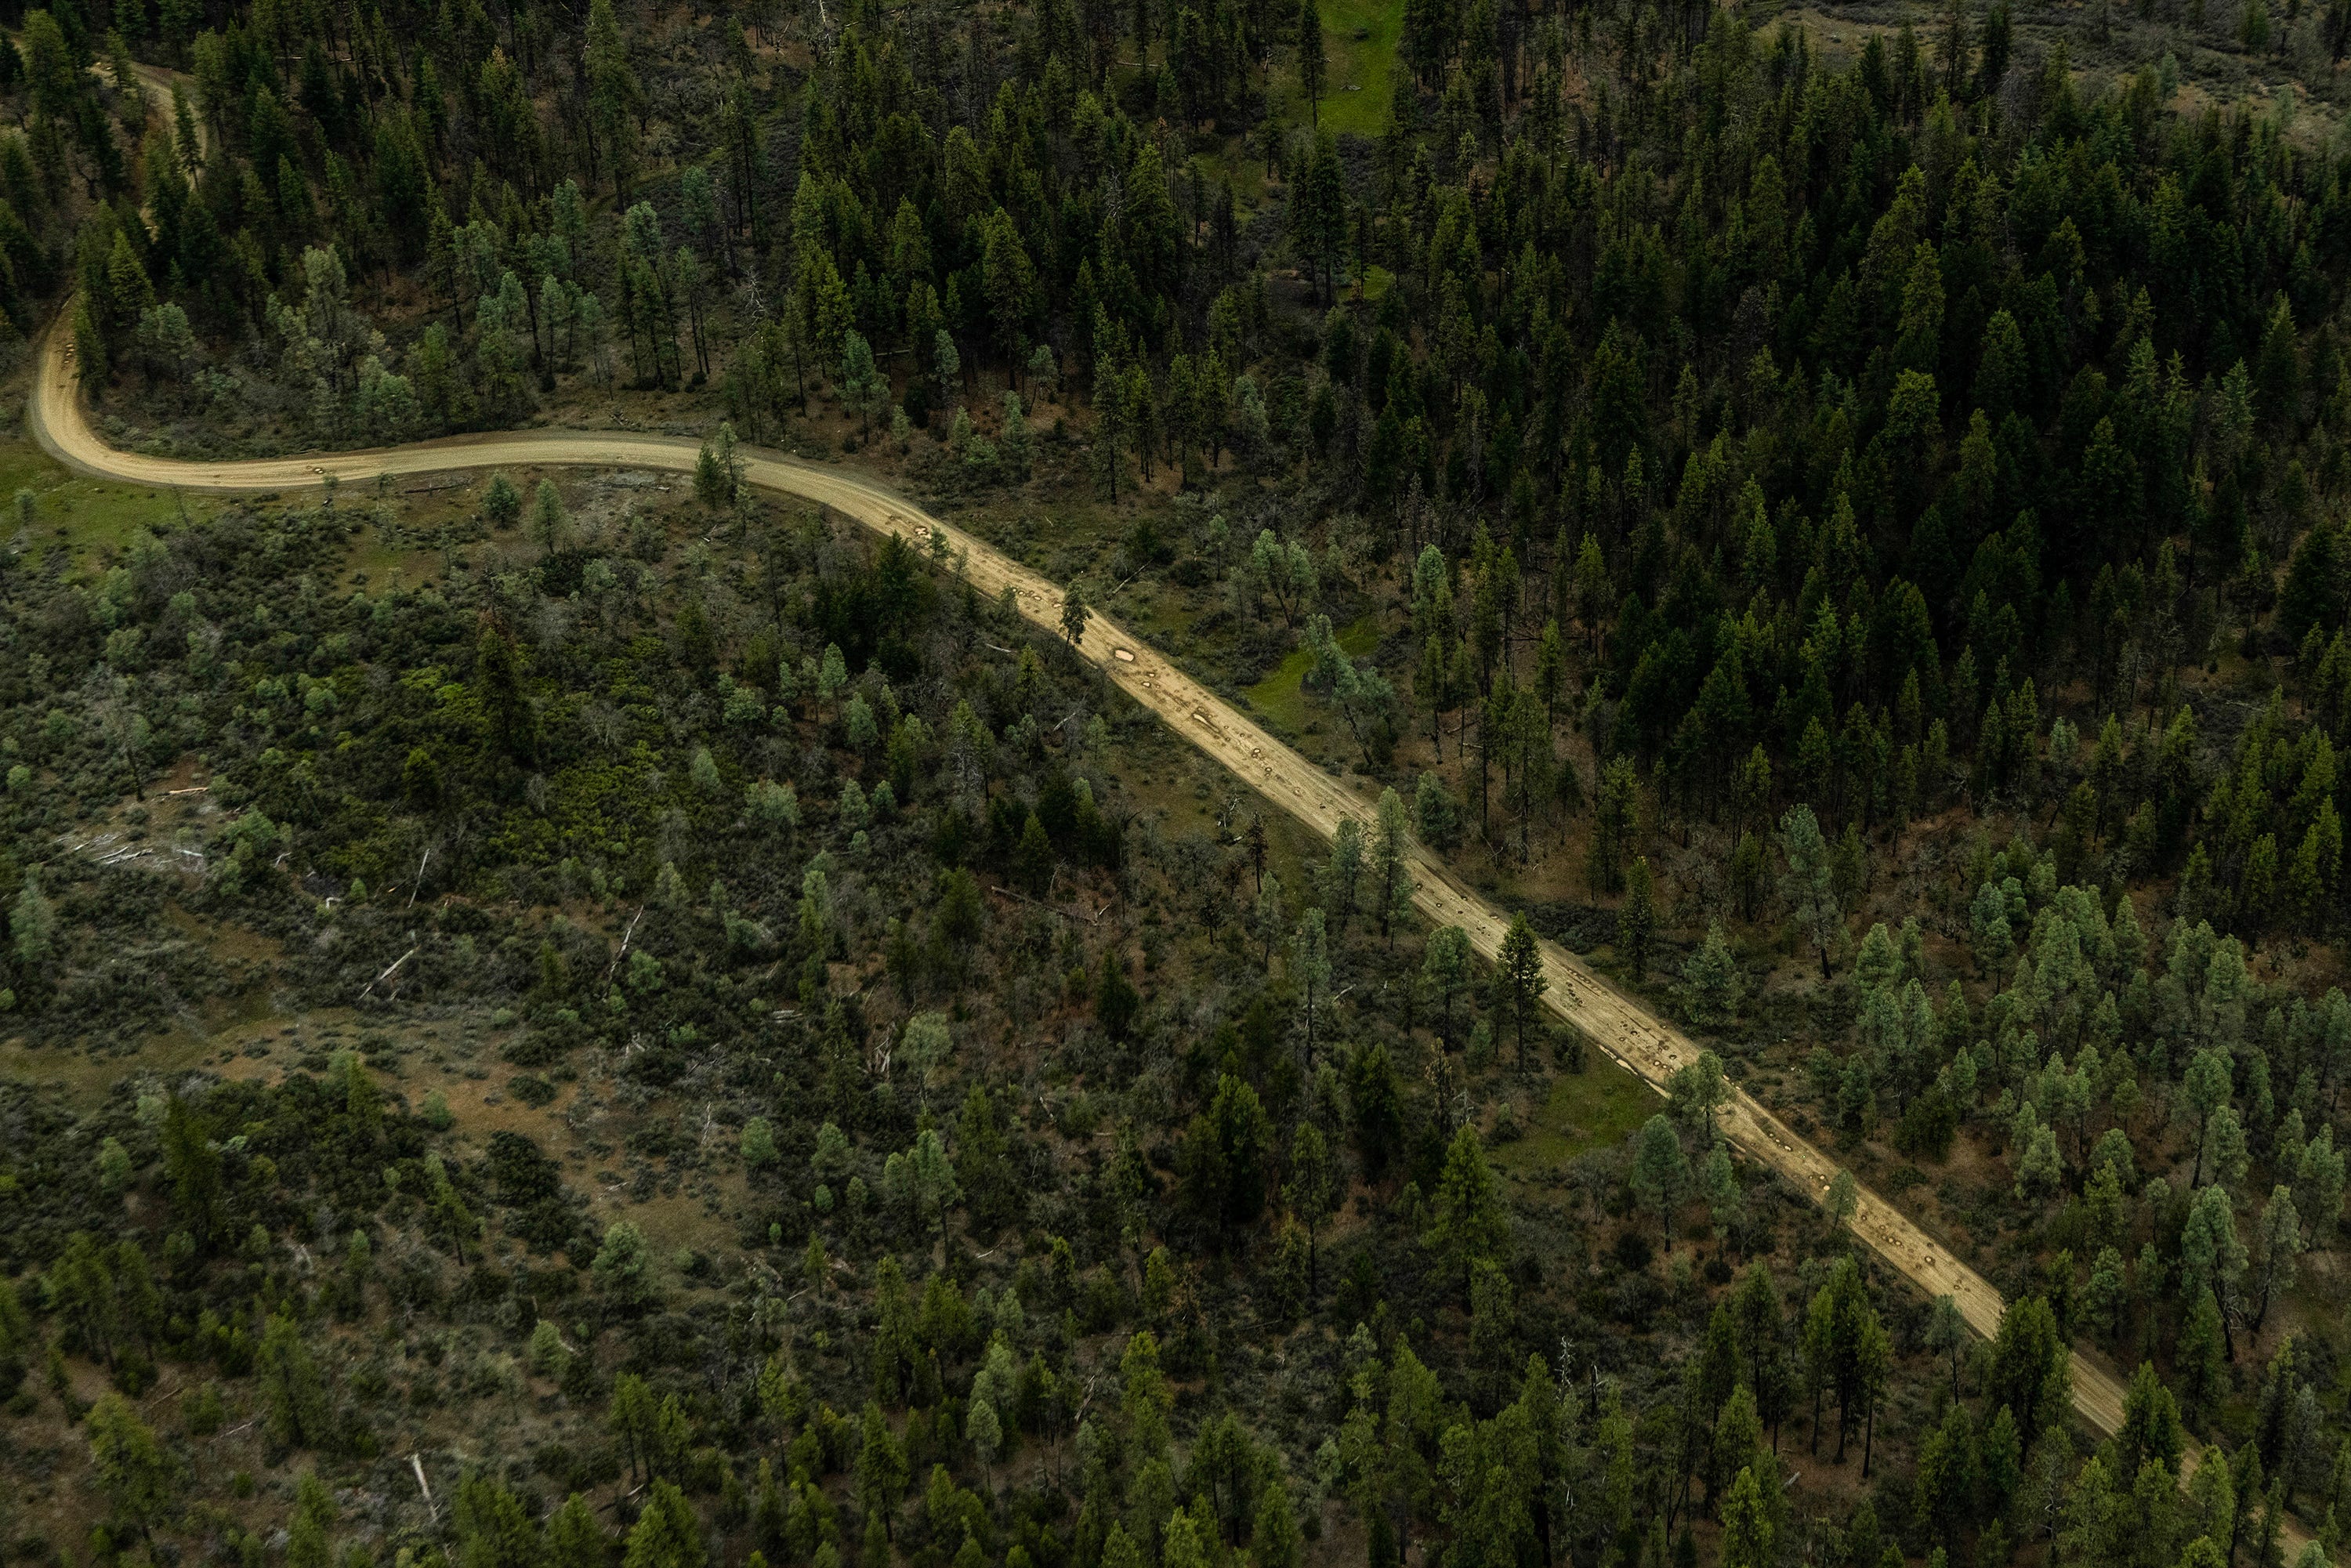 Criminal syndicates and other cannabis cultivators sometimes bulldoze their own roads, rough and with deep potholes, through the Northern California wilderness.